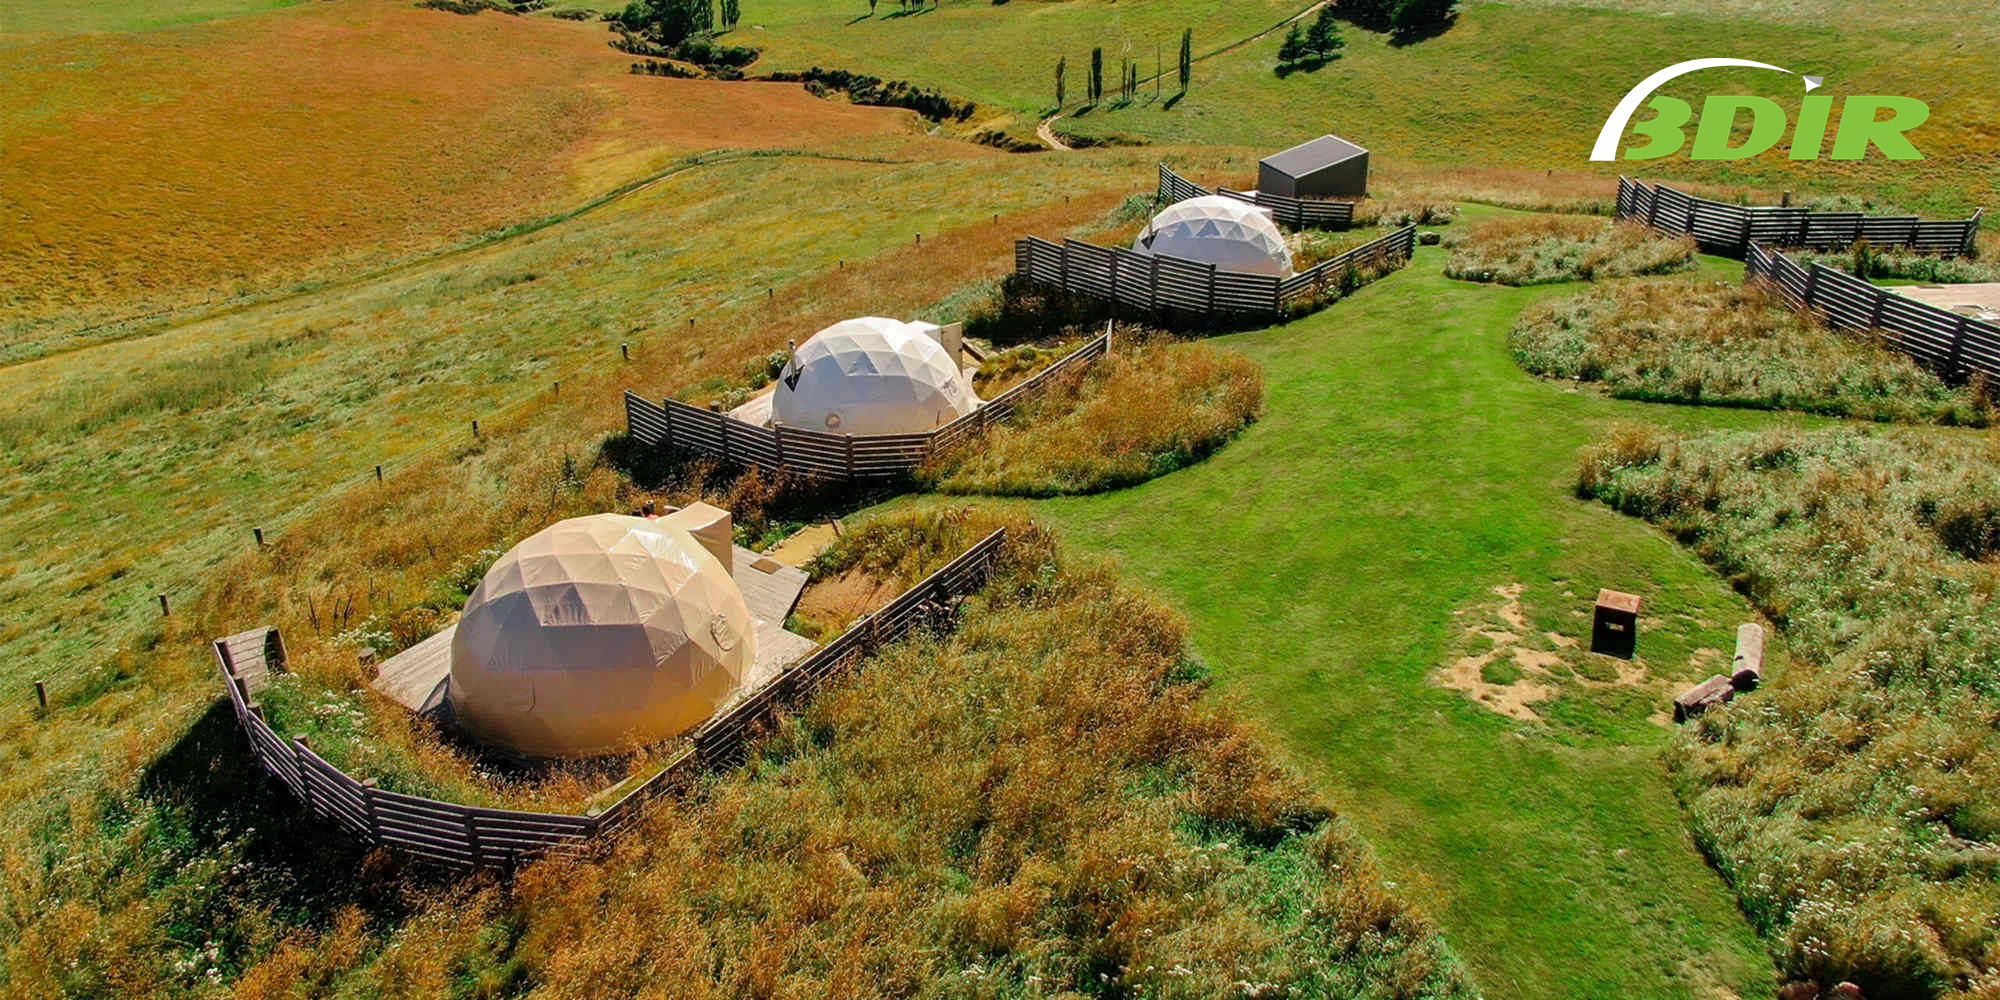 Why Having a Geodome Tent is a Smart Choice in 2022